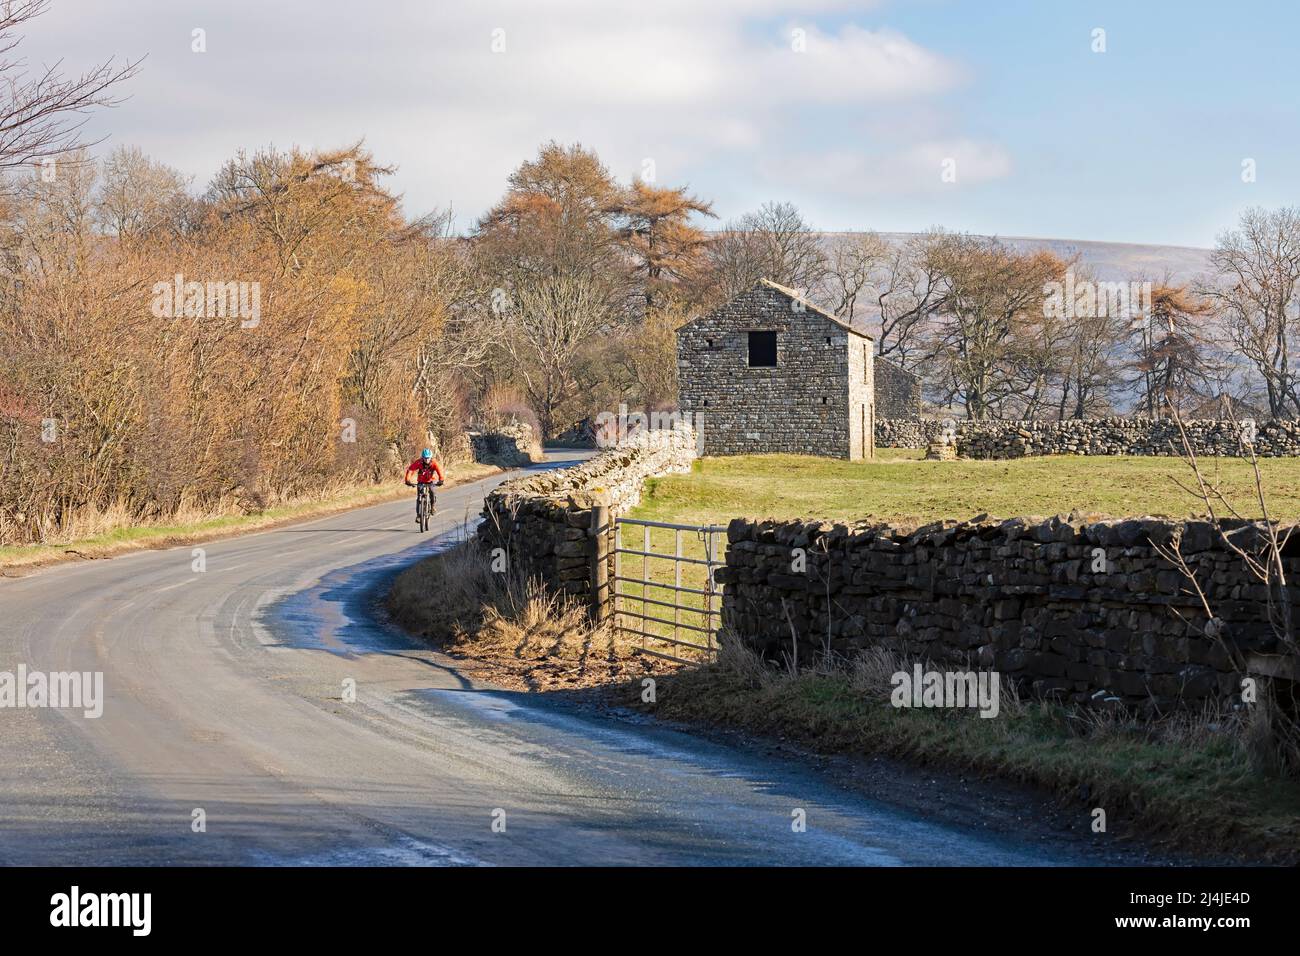 A rider cycles past a stone barn in Swaledale, Yorkshire Dales National Park near Reeth. Stock Photo